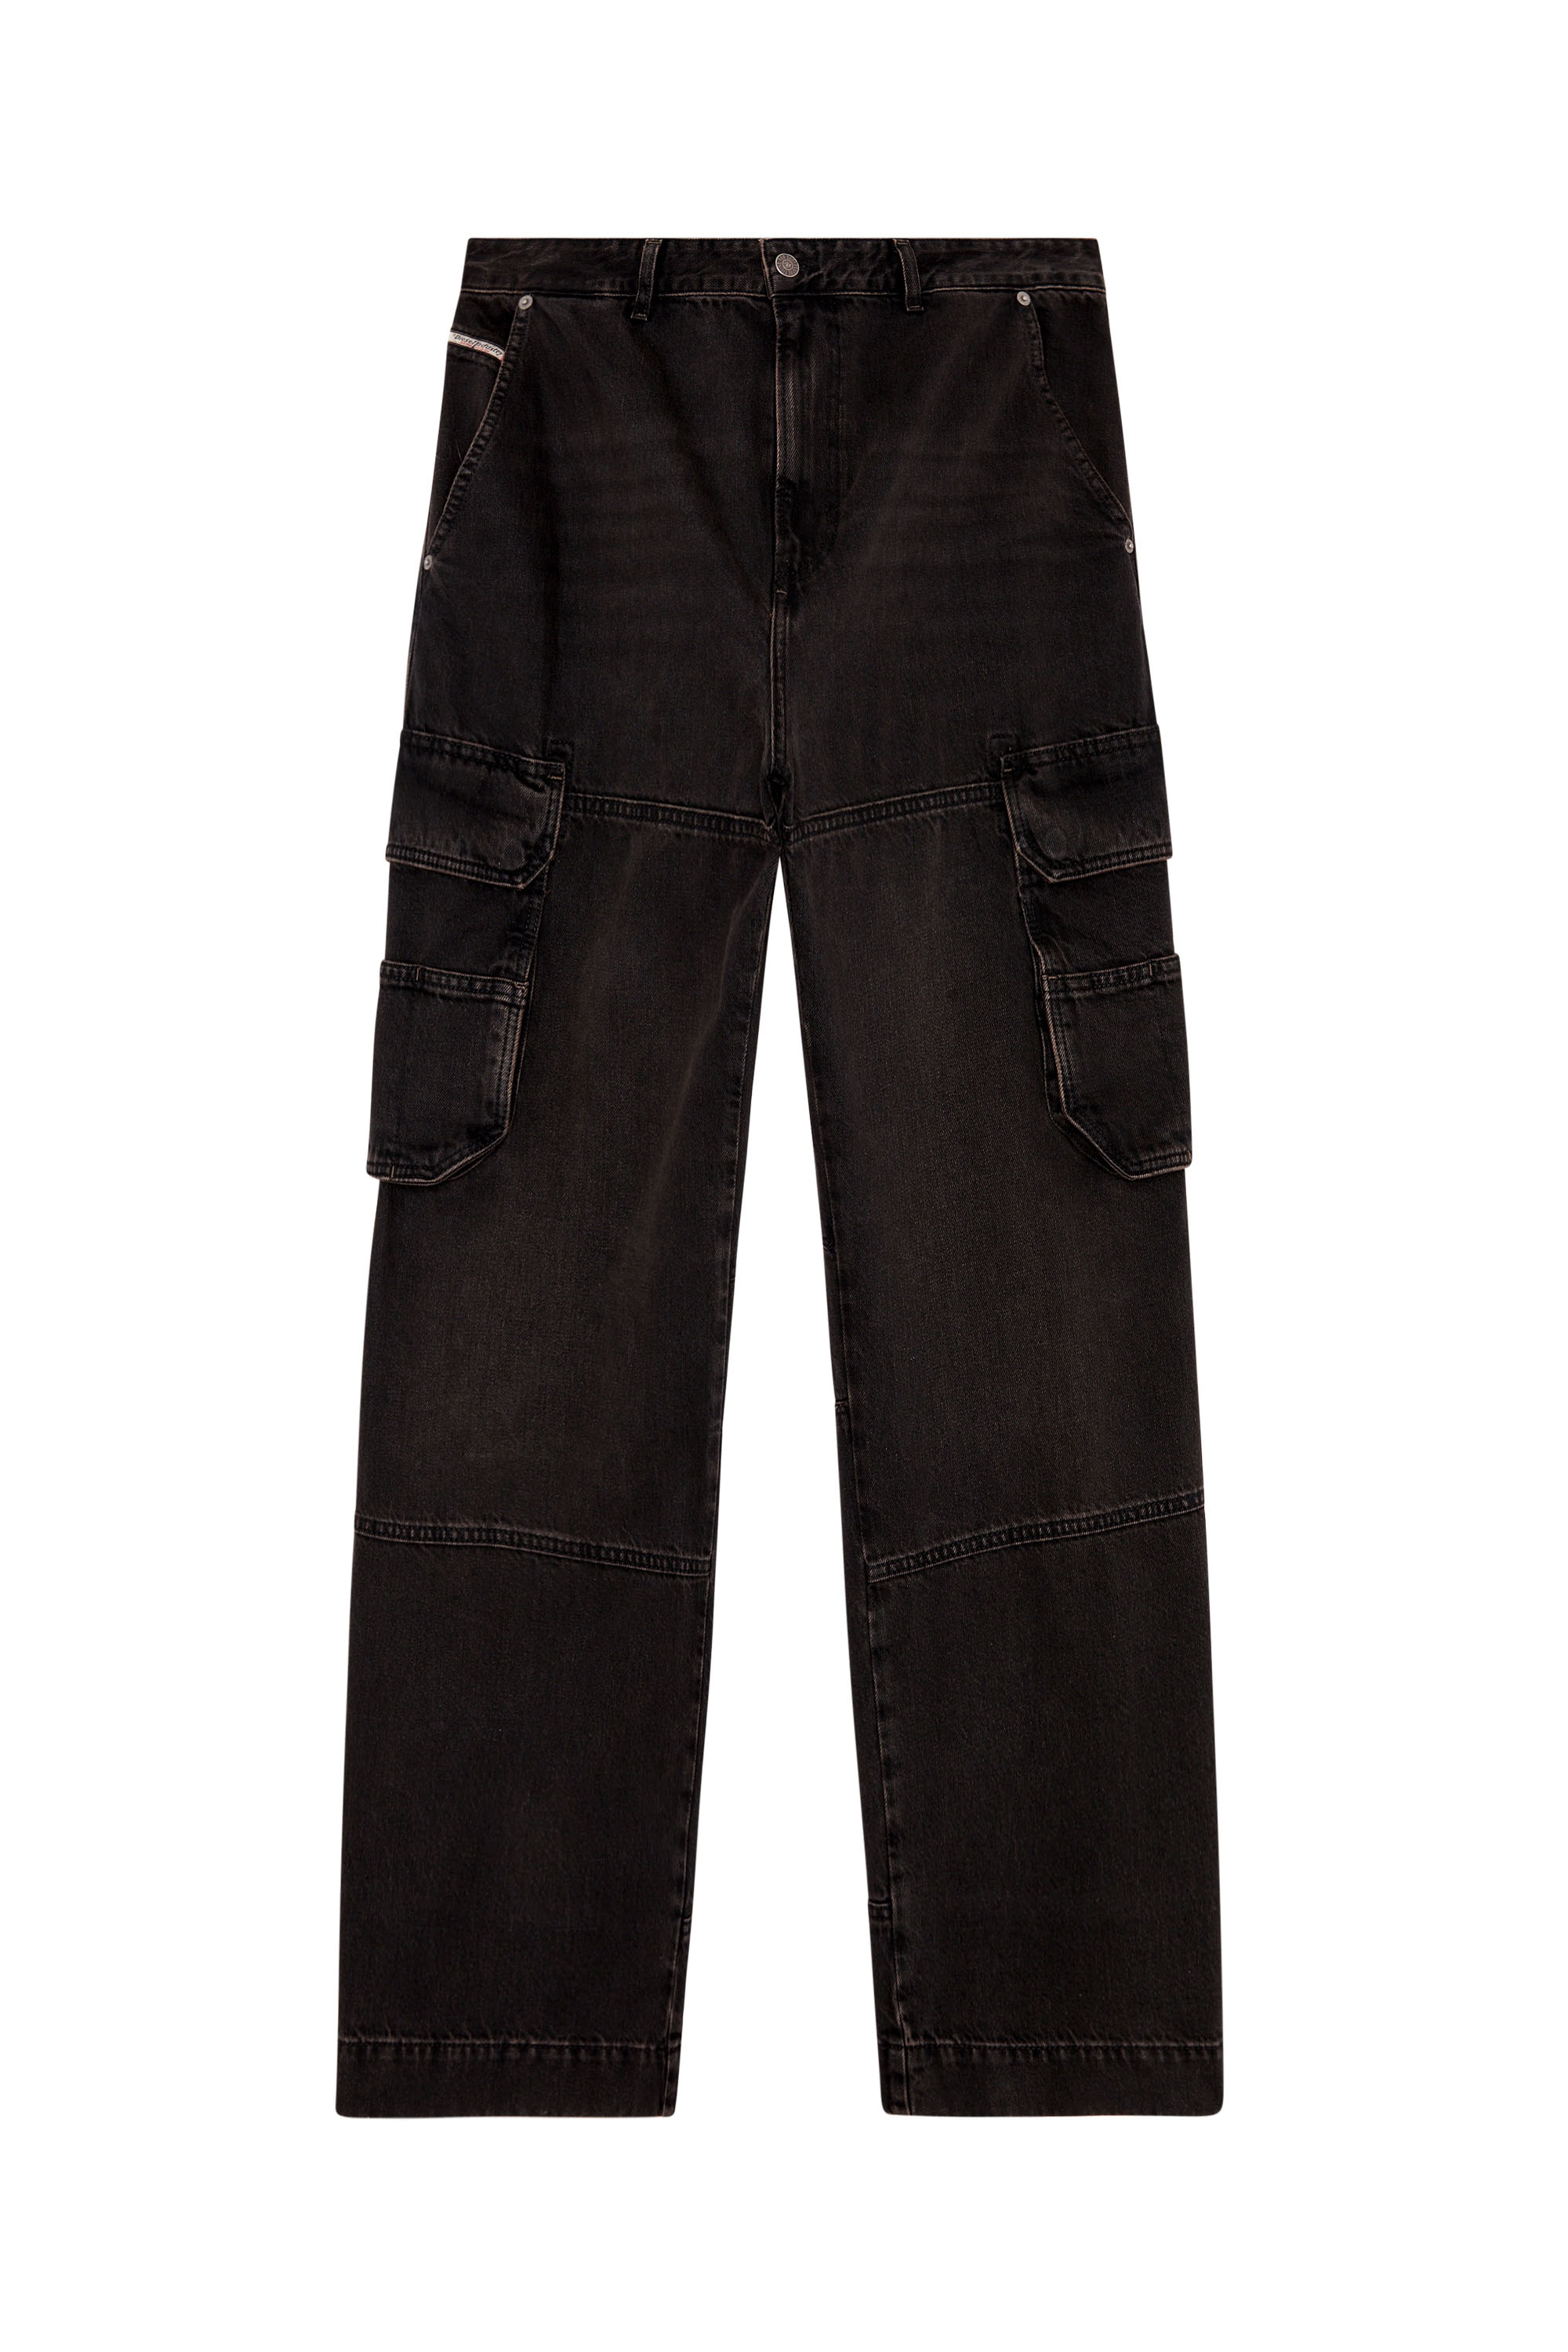 Diesel - Straight Jeans D-Fish 0KIAG, Hombre Straight Jeans - D-Fish in Negro - Image 5